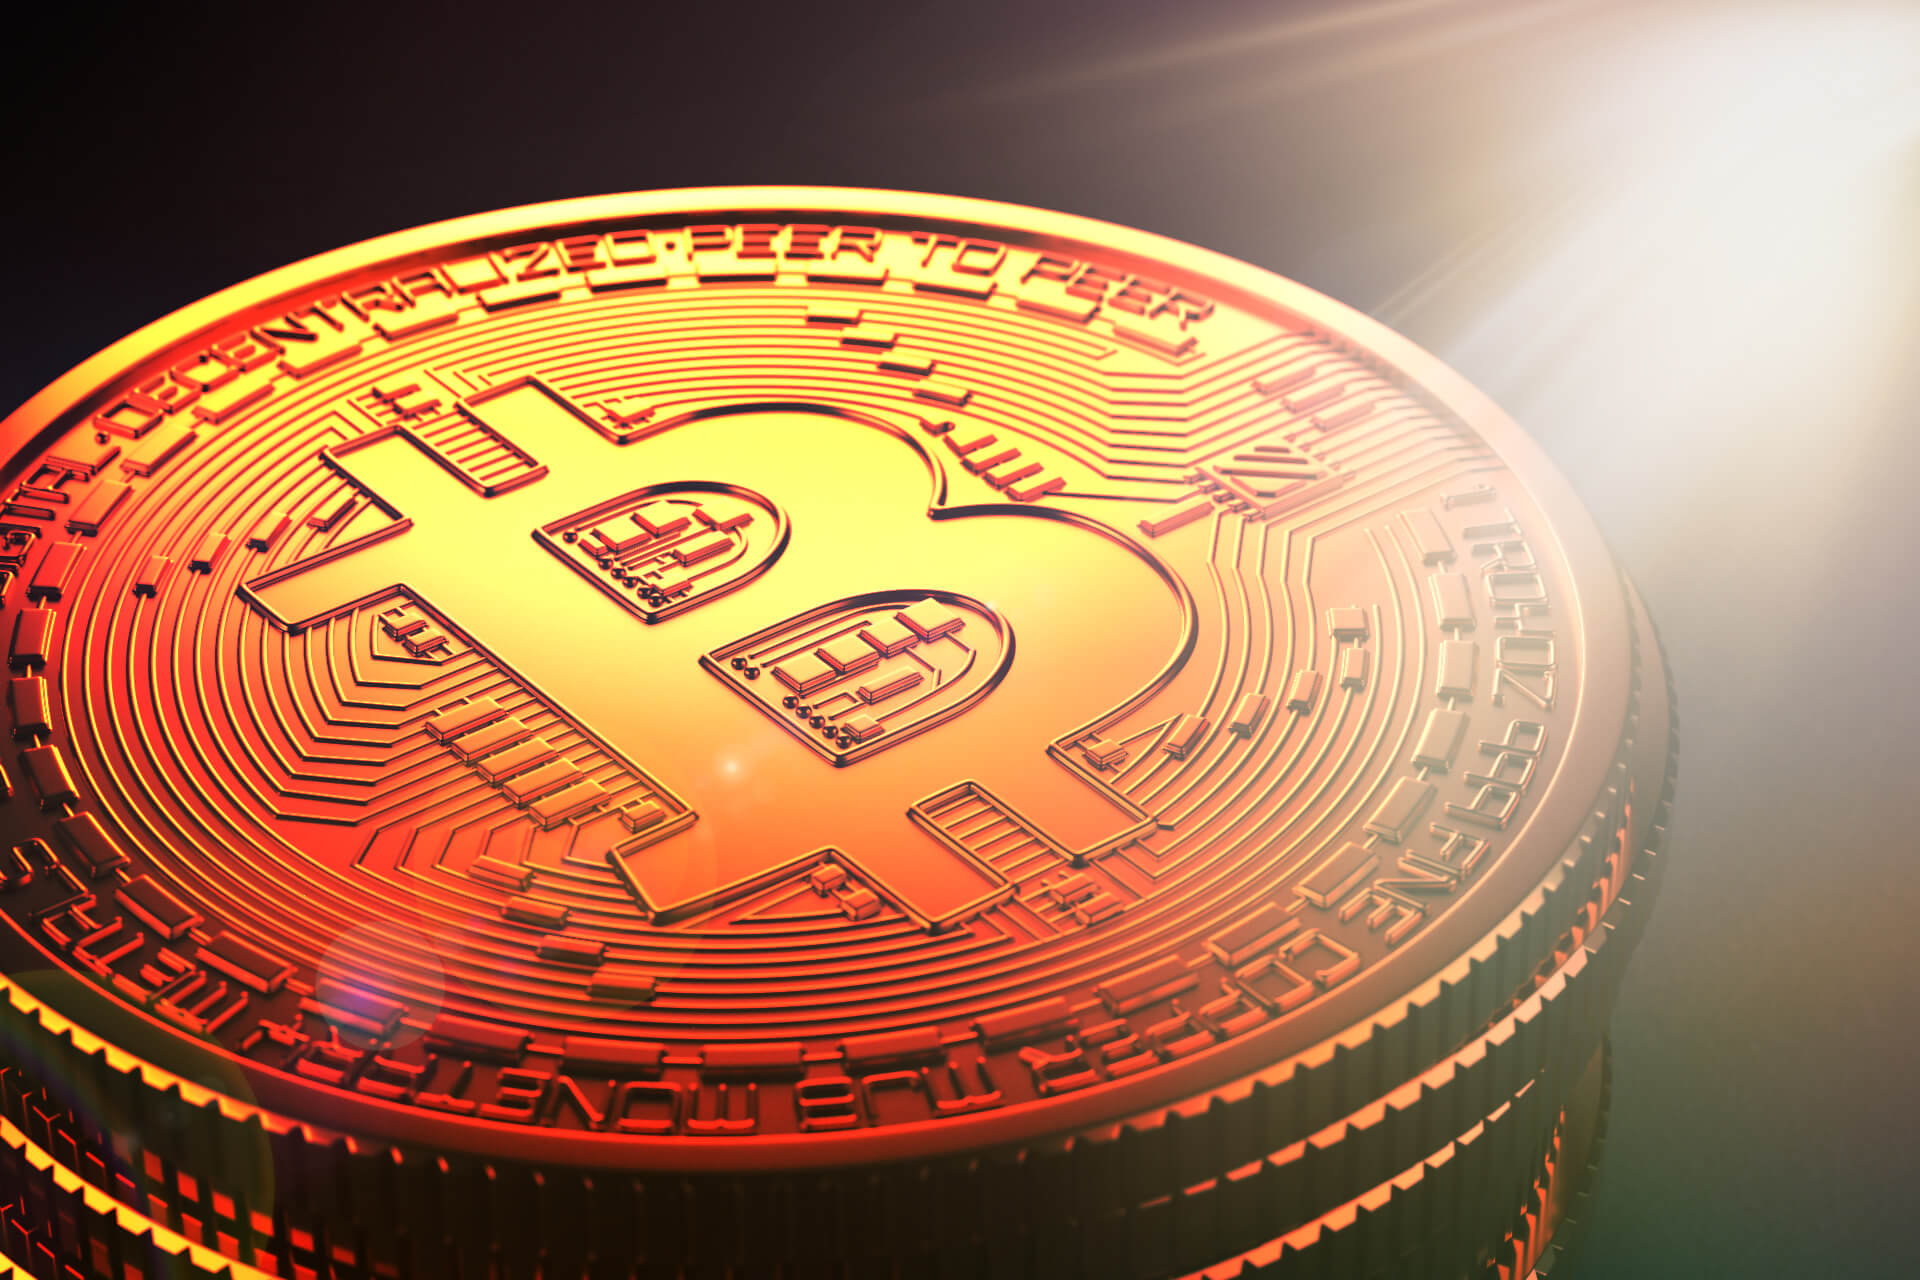 Bitcoin stack with lighting effect free image download